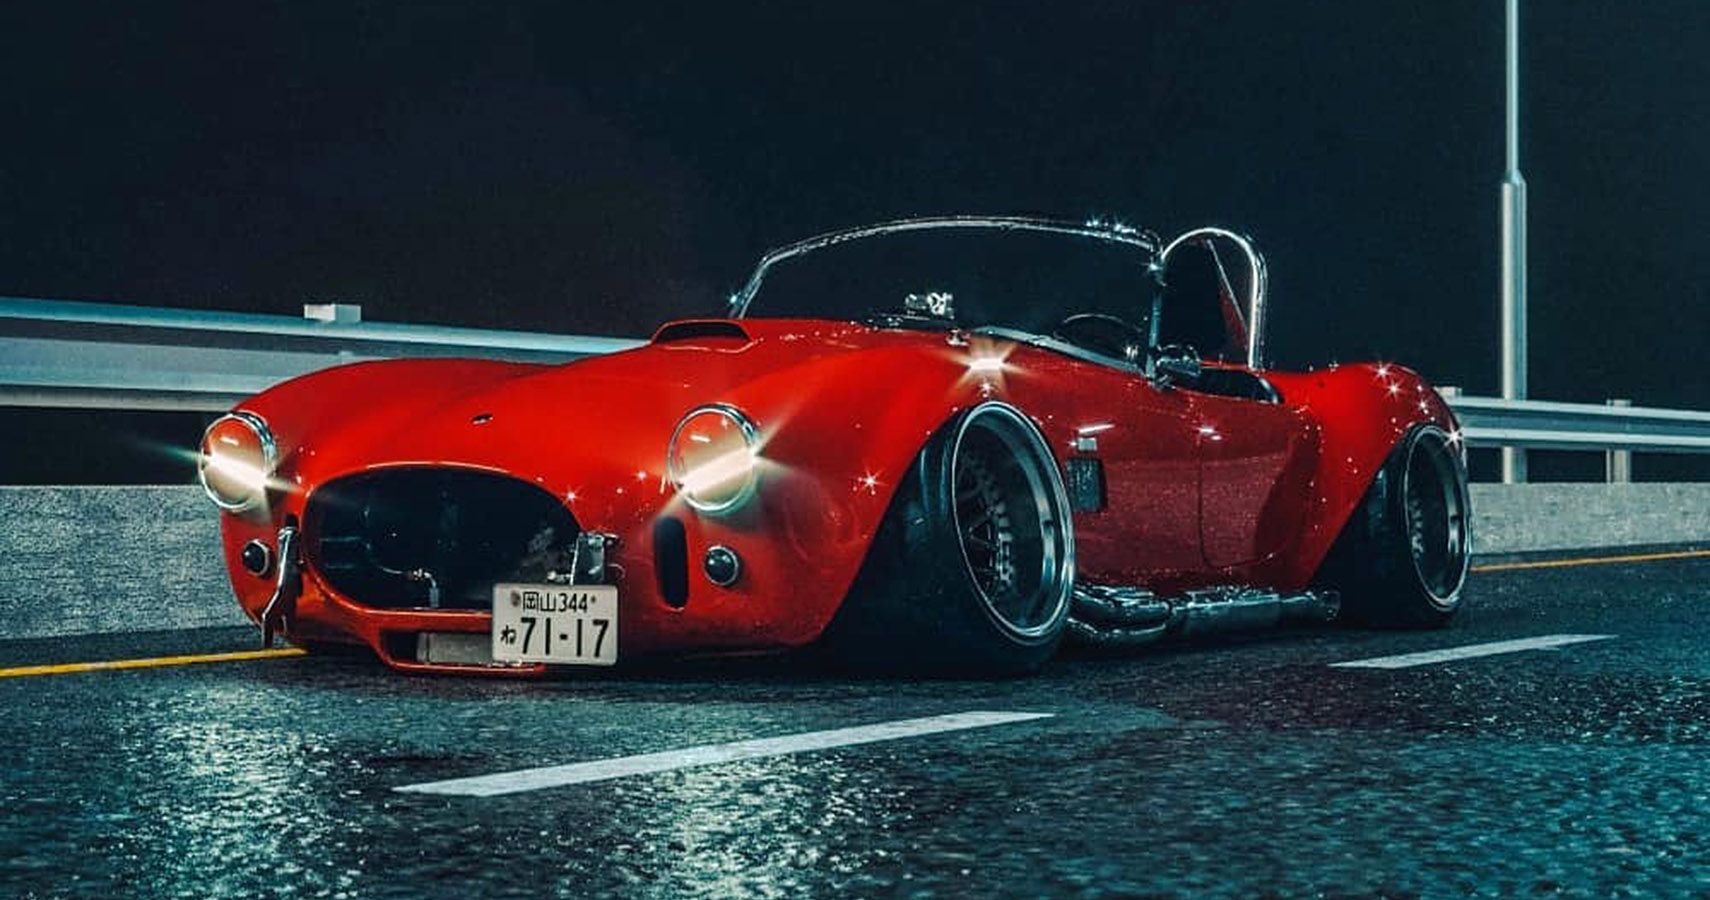 A Cherry Red Shelby Cobra, Stanced